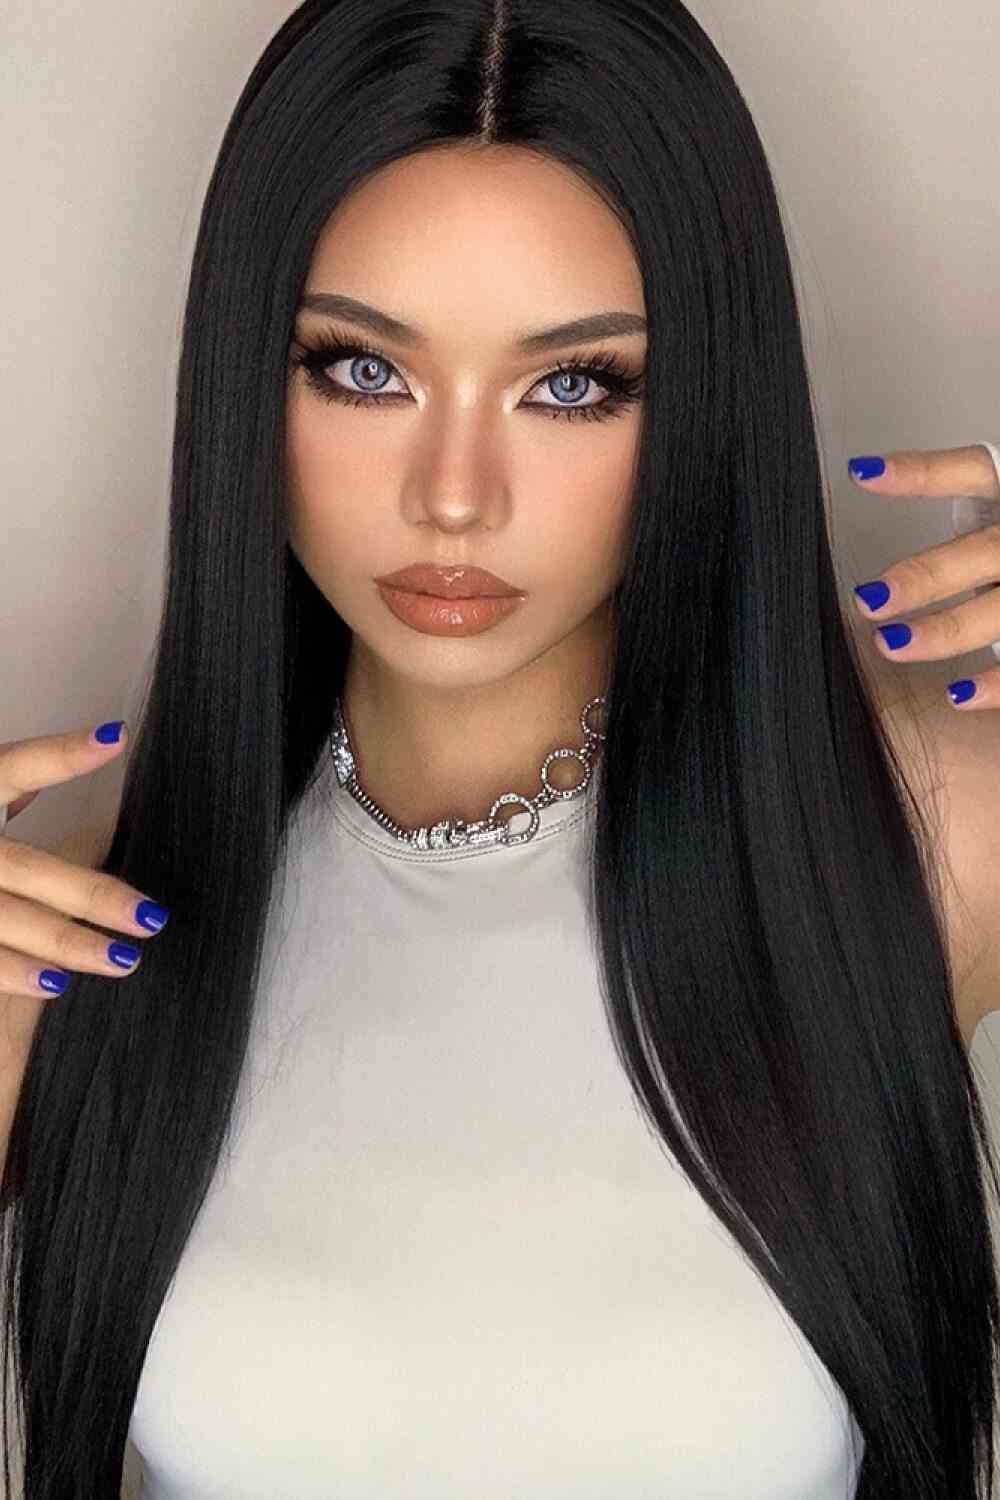 13*2" Long Lace Front Straight Synthetic Wigs 26" Long 150% Density - lolaluxeshop